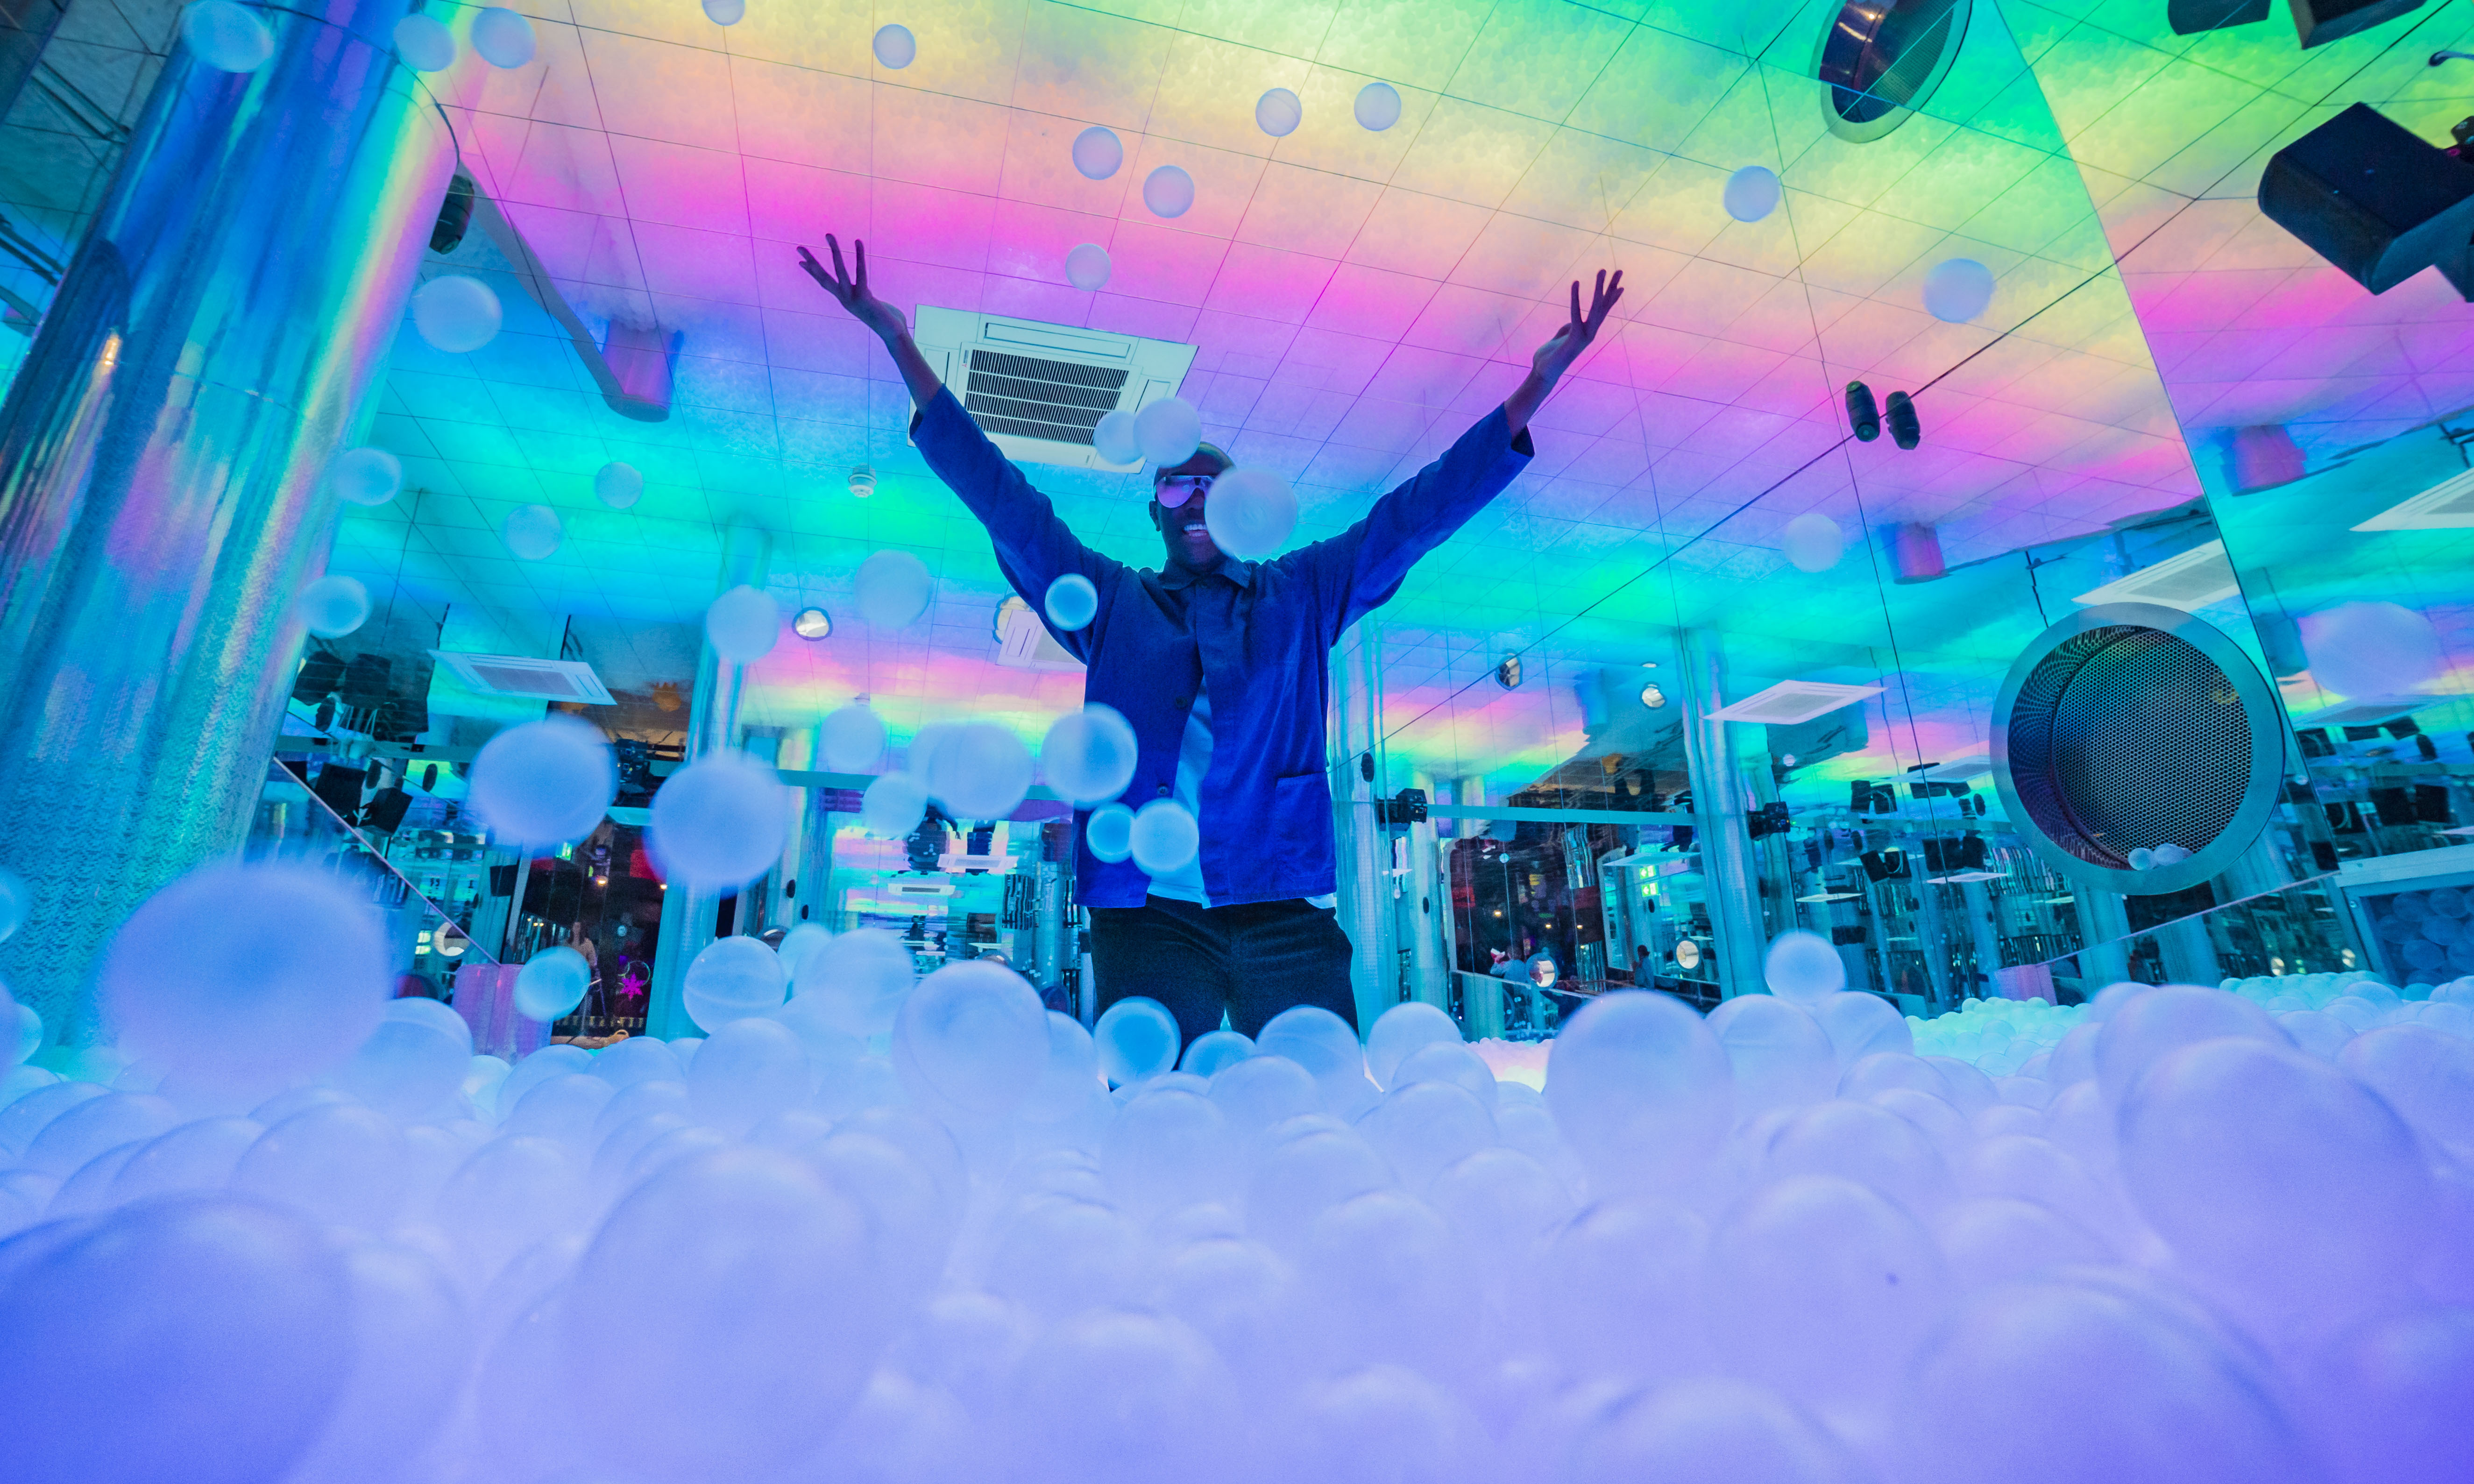 Man in blue shirt in rainbow ball pit throwing balls up